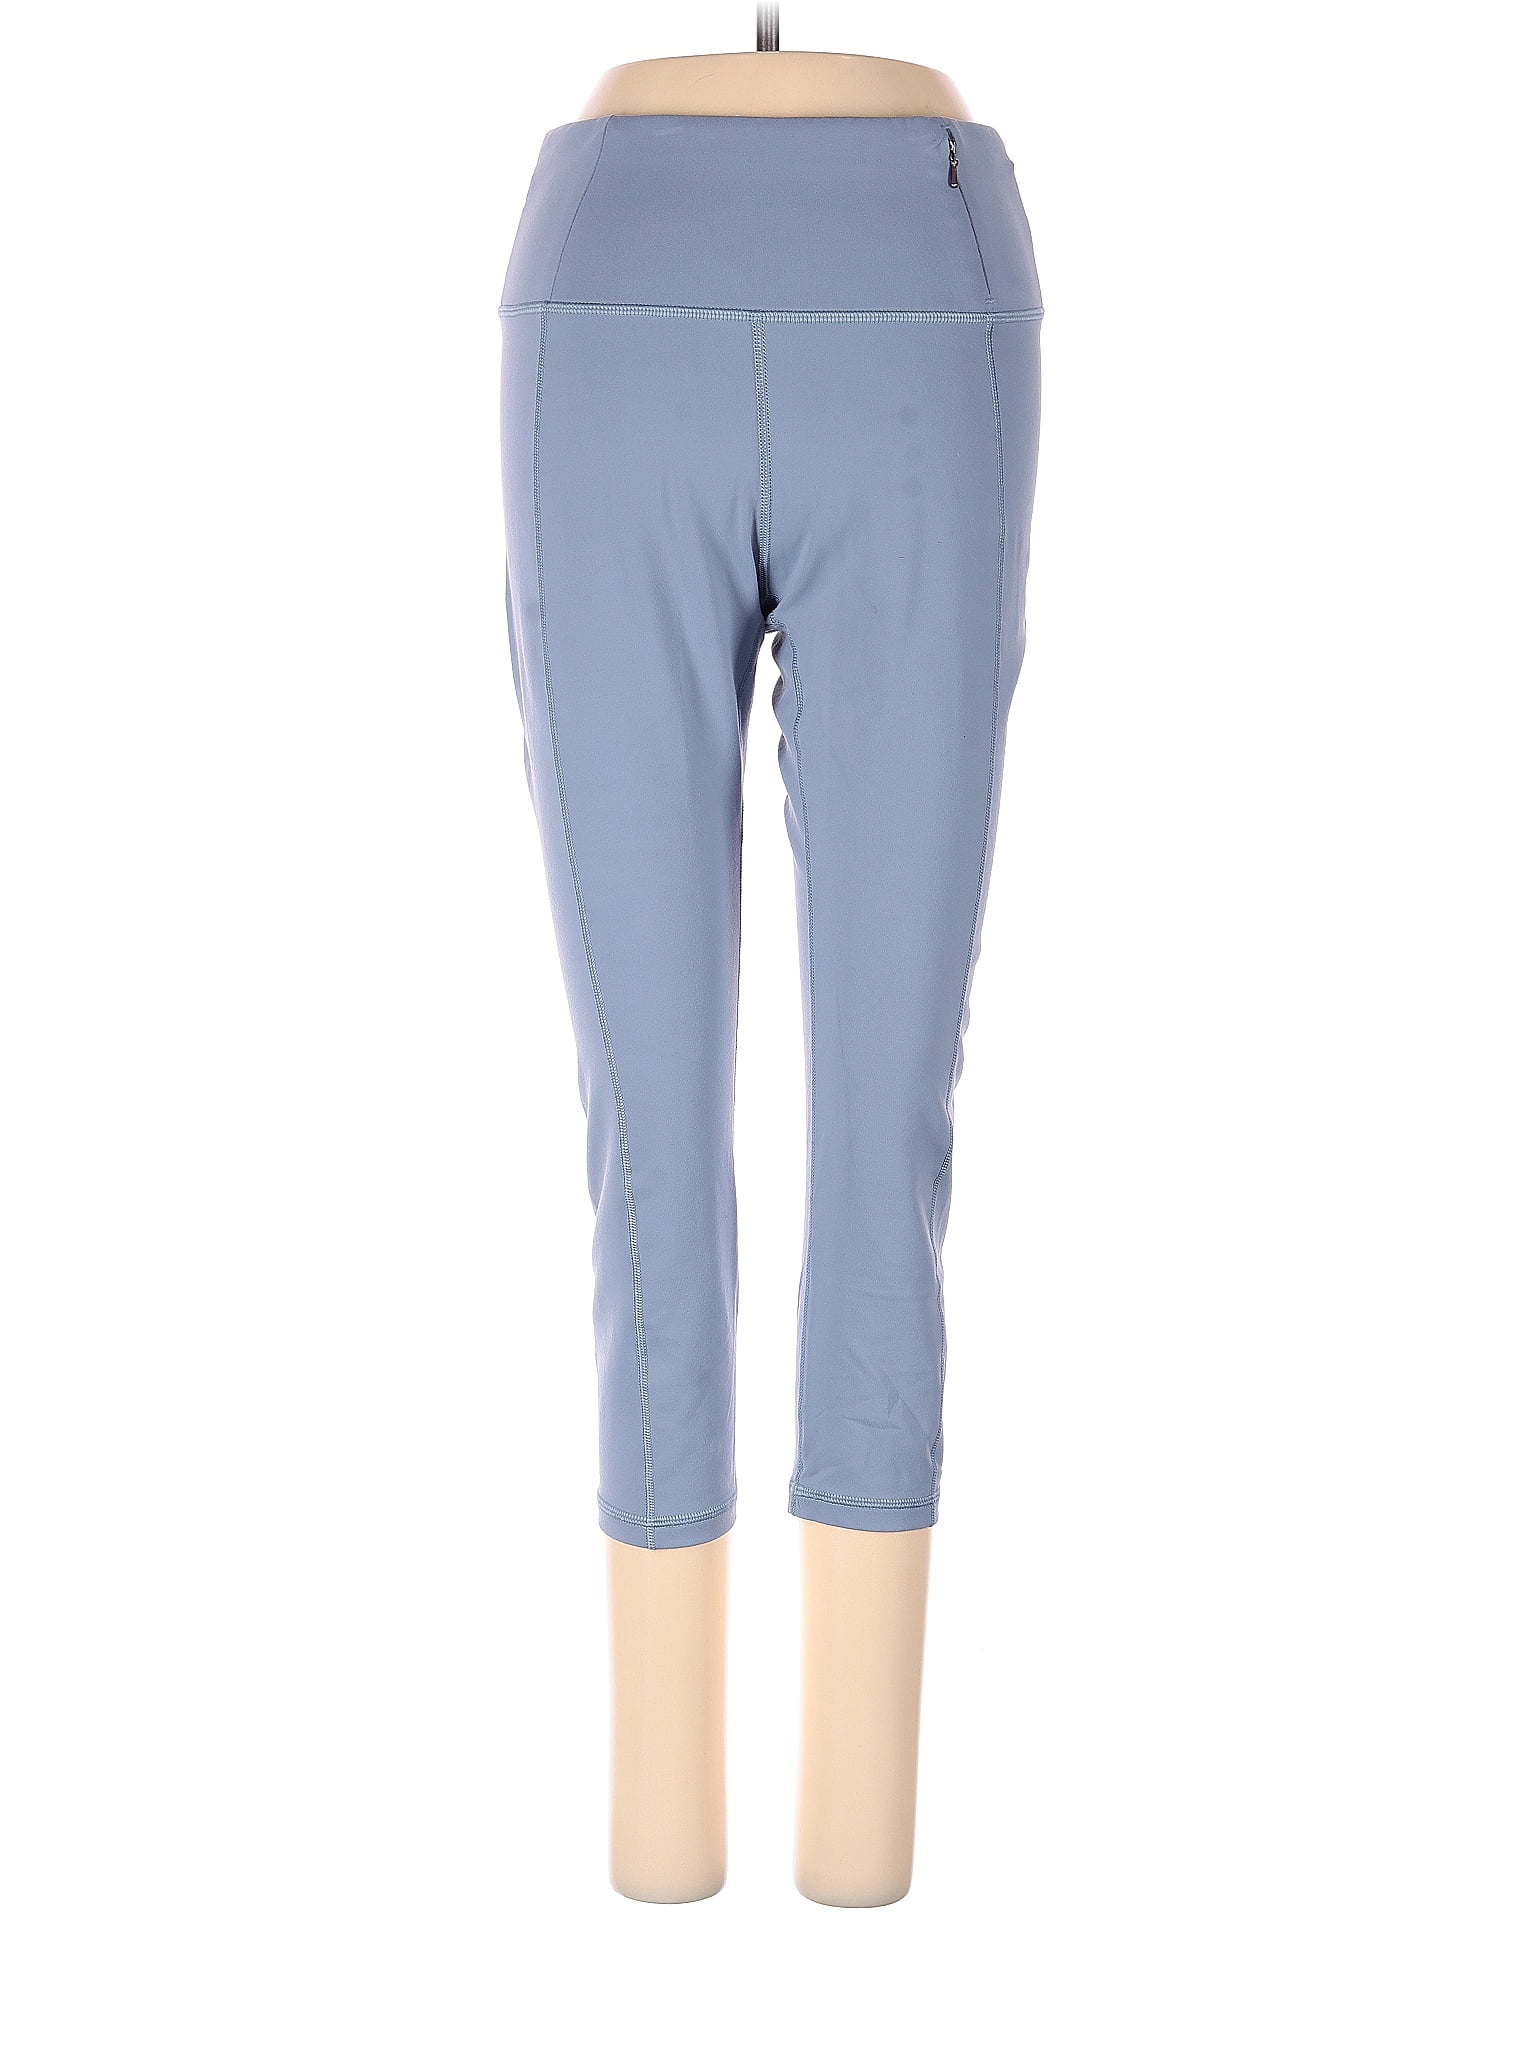 Calia by Carrie Underwood Solid Blue Active Pants Size S - 66% off